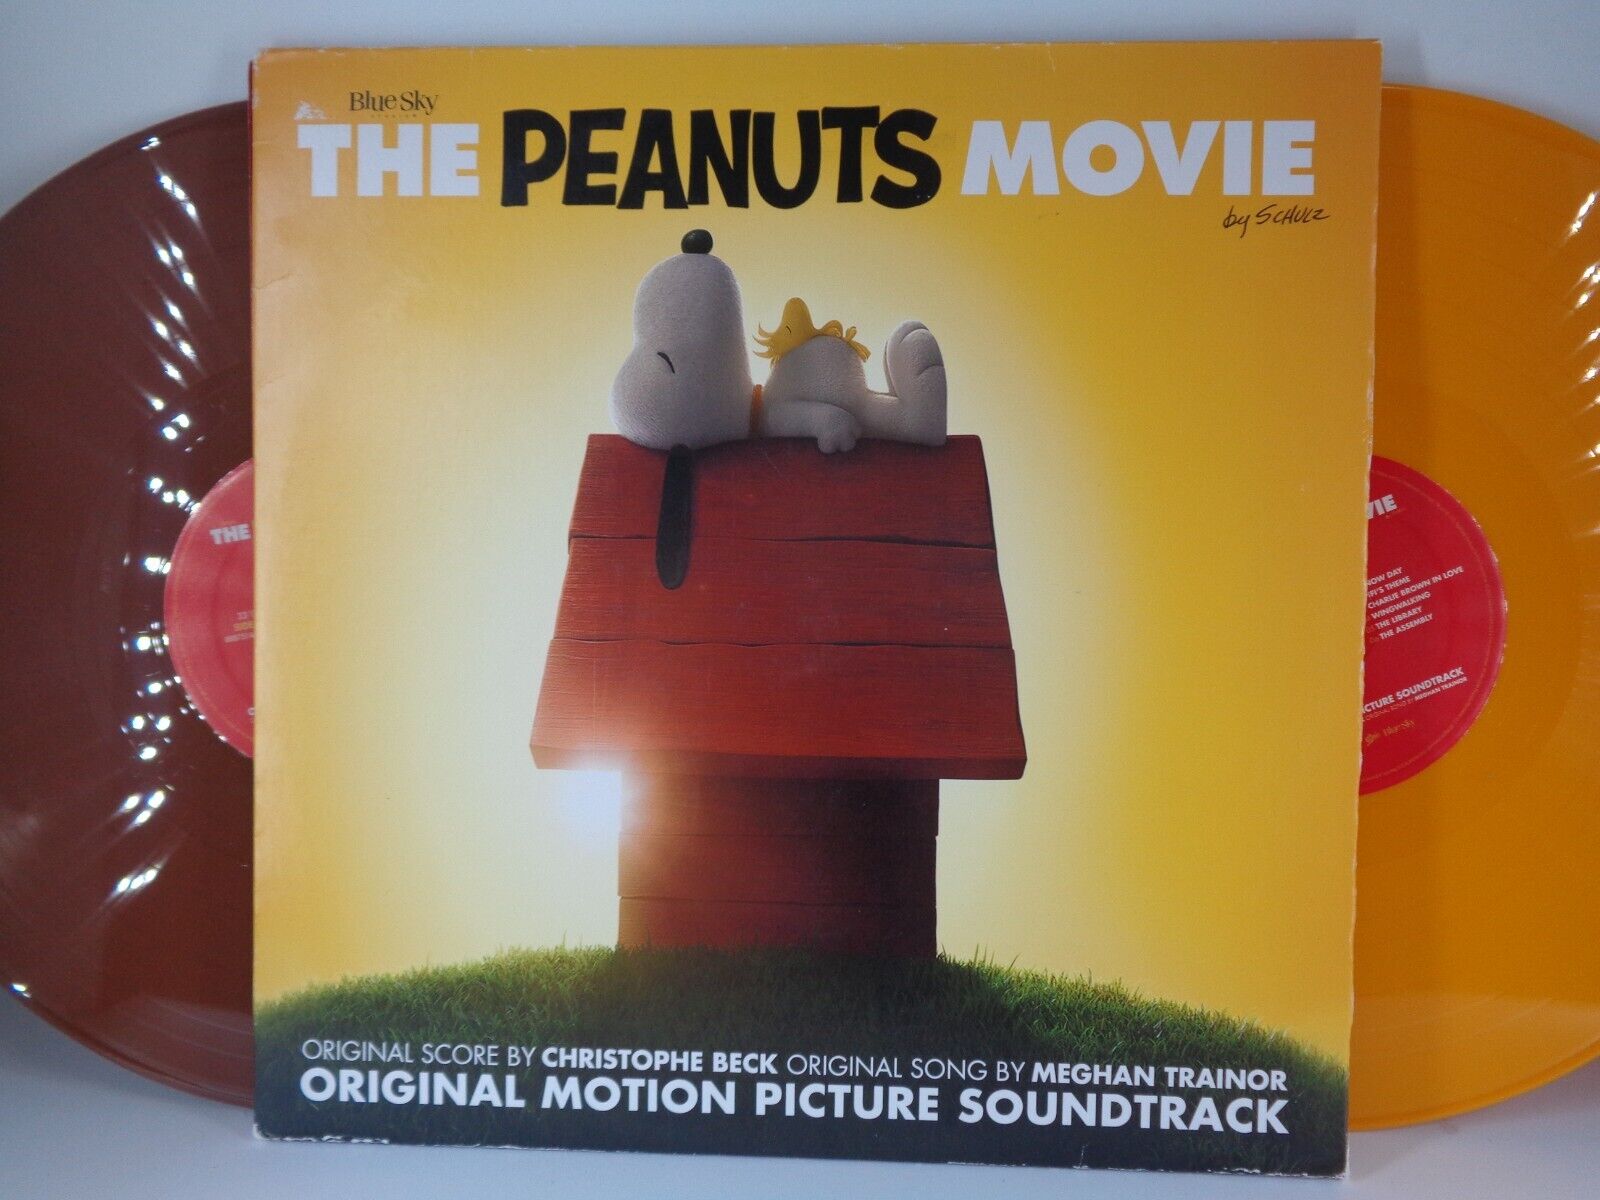 PEANUTS MOVIE Cristophe Beck picture inners Meghan Trainor (2015) M- LP